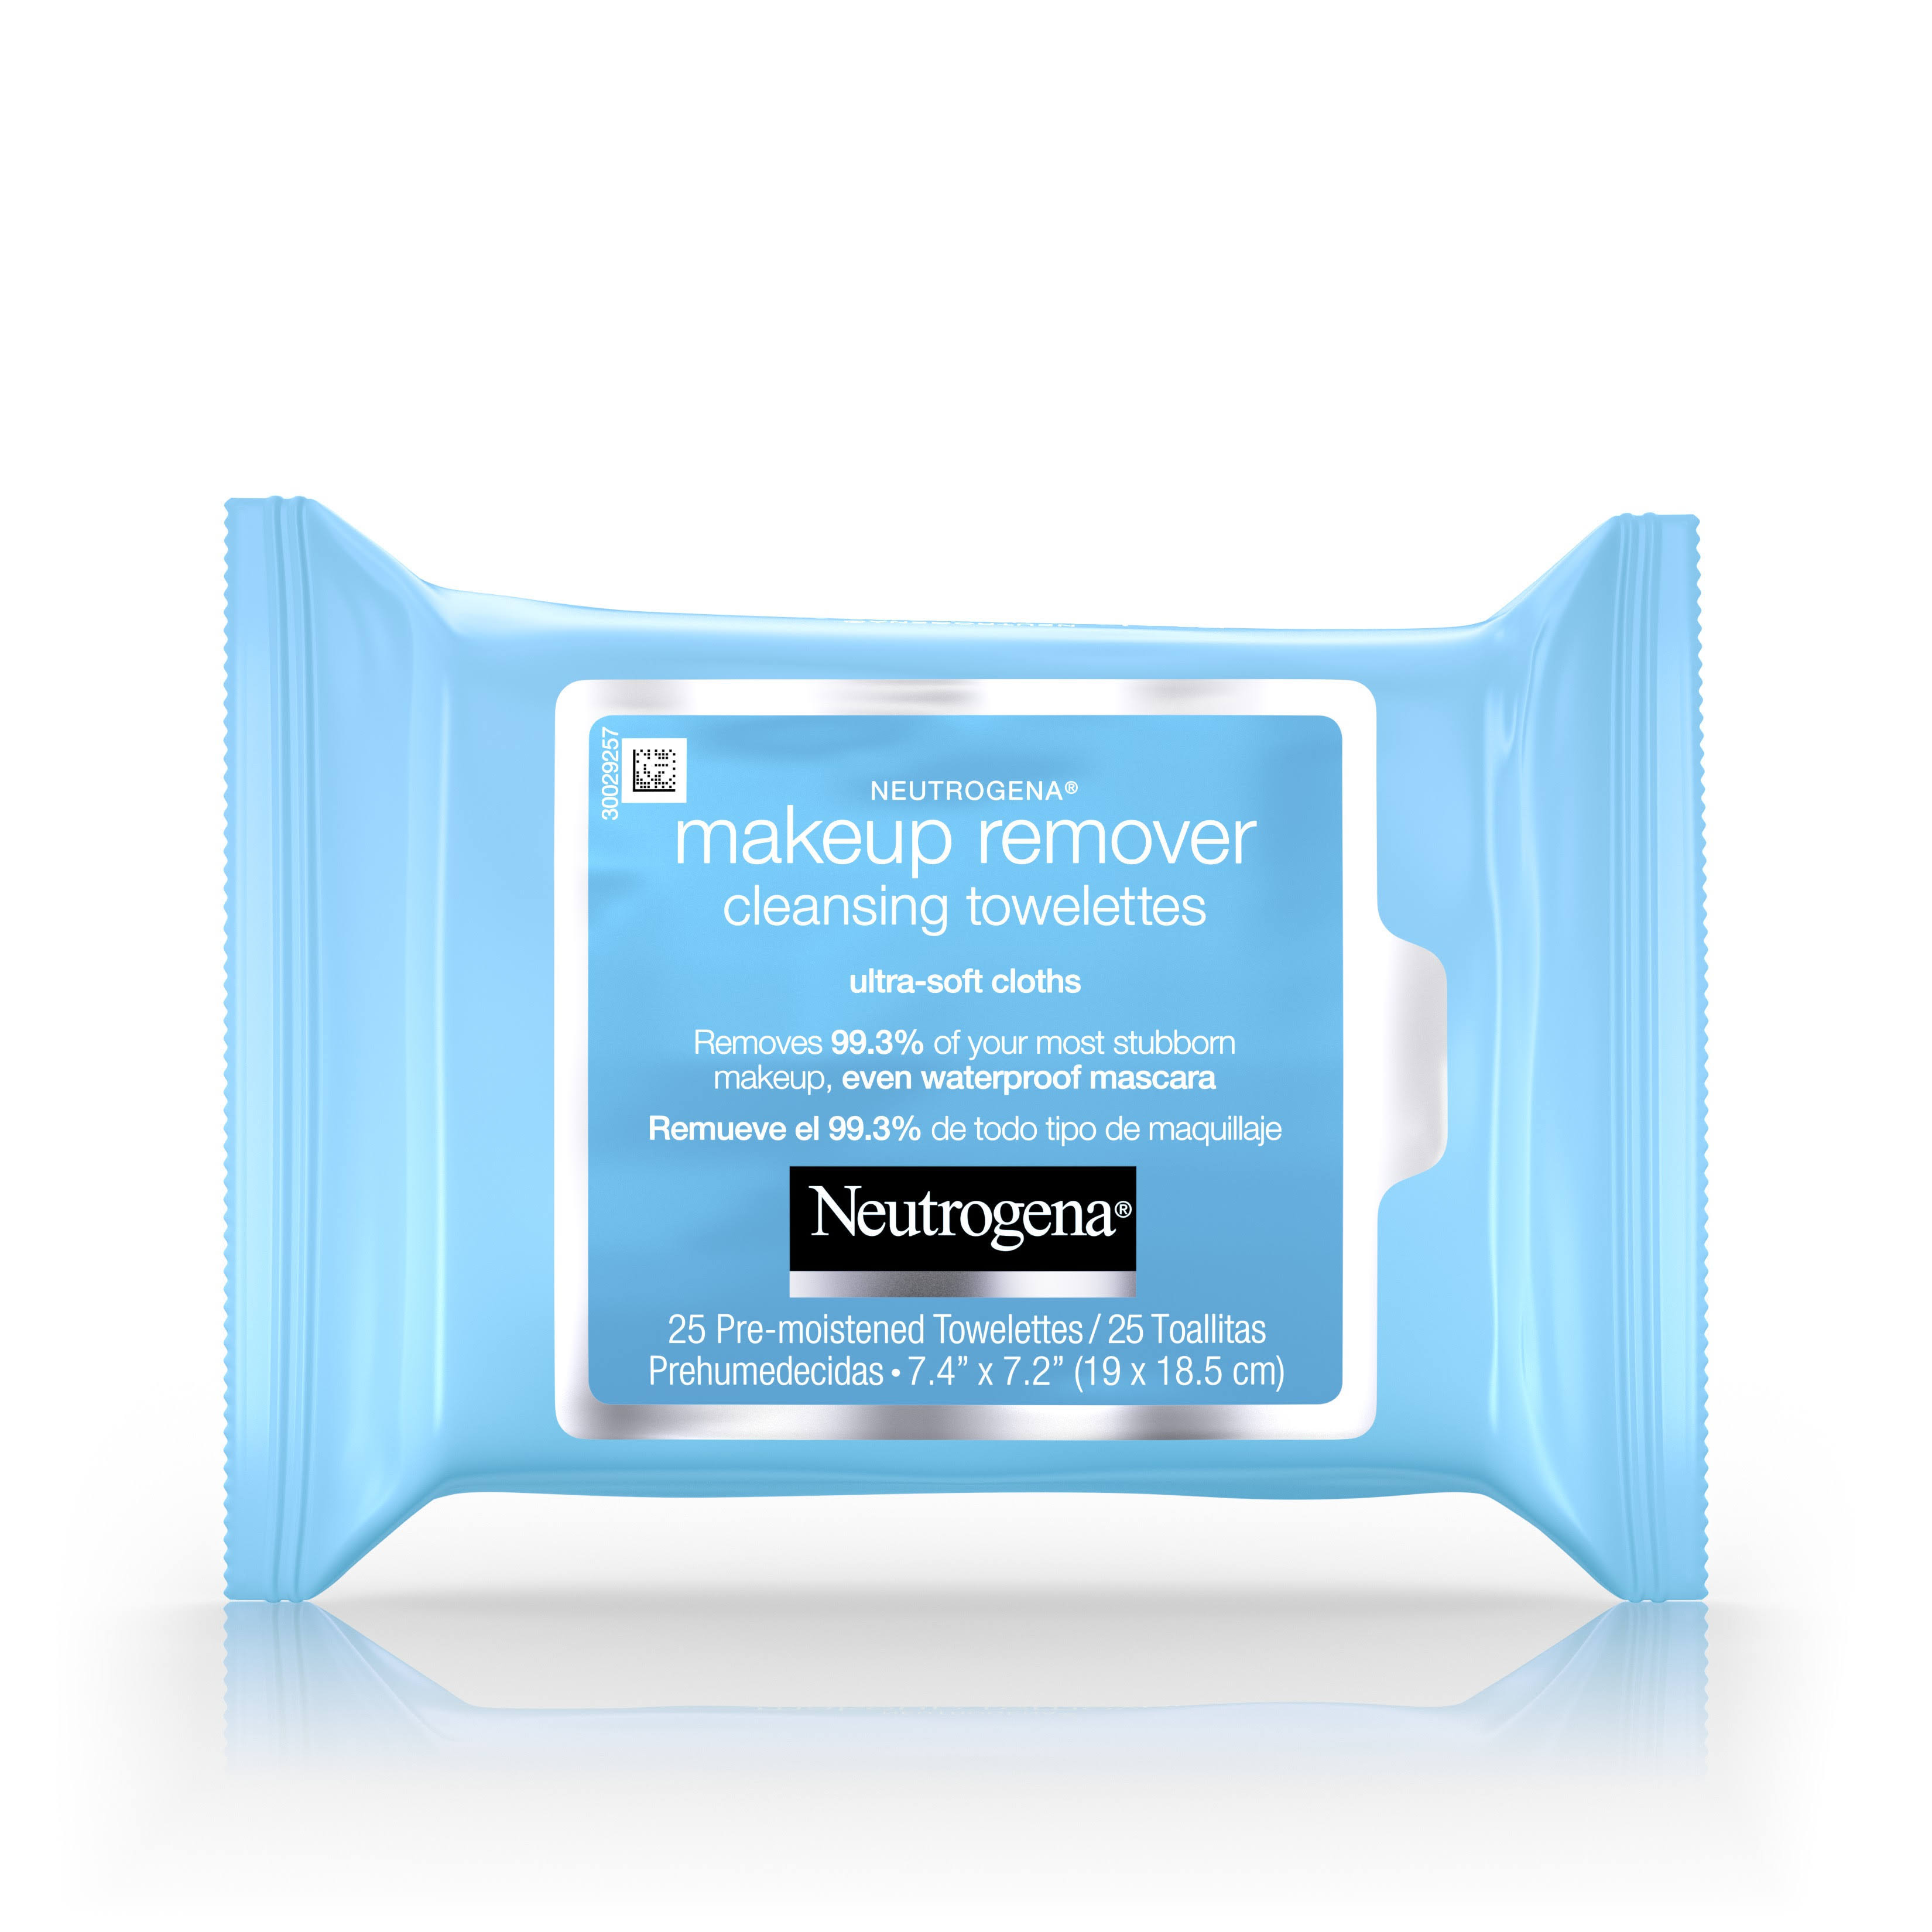 Neutrogena Make-up Remover Cleansing Towelettes - 25 ct